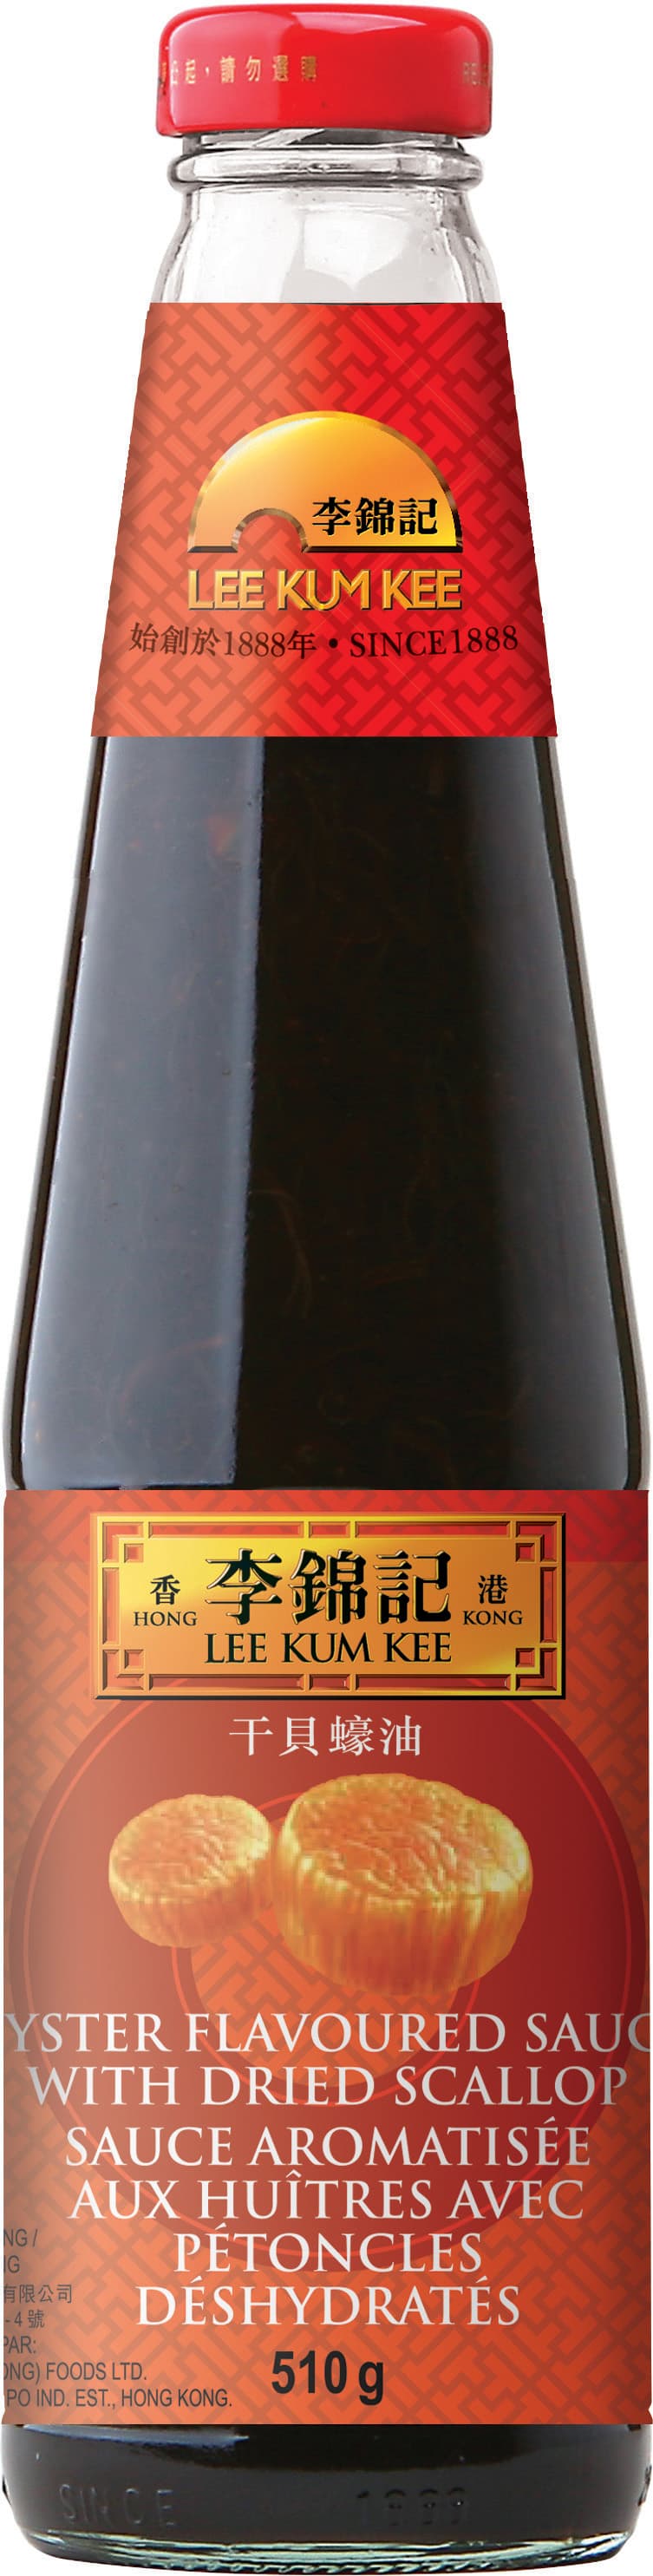 Oyster Flavoured Sauce with Dried Scallop 510g 